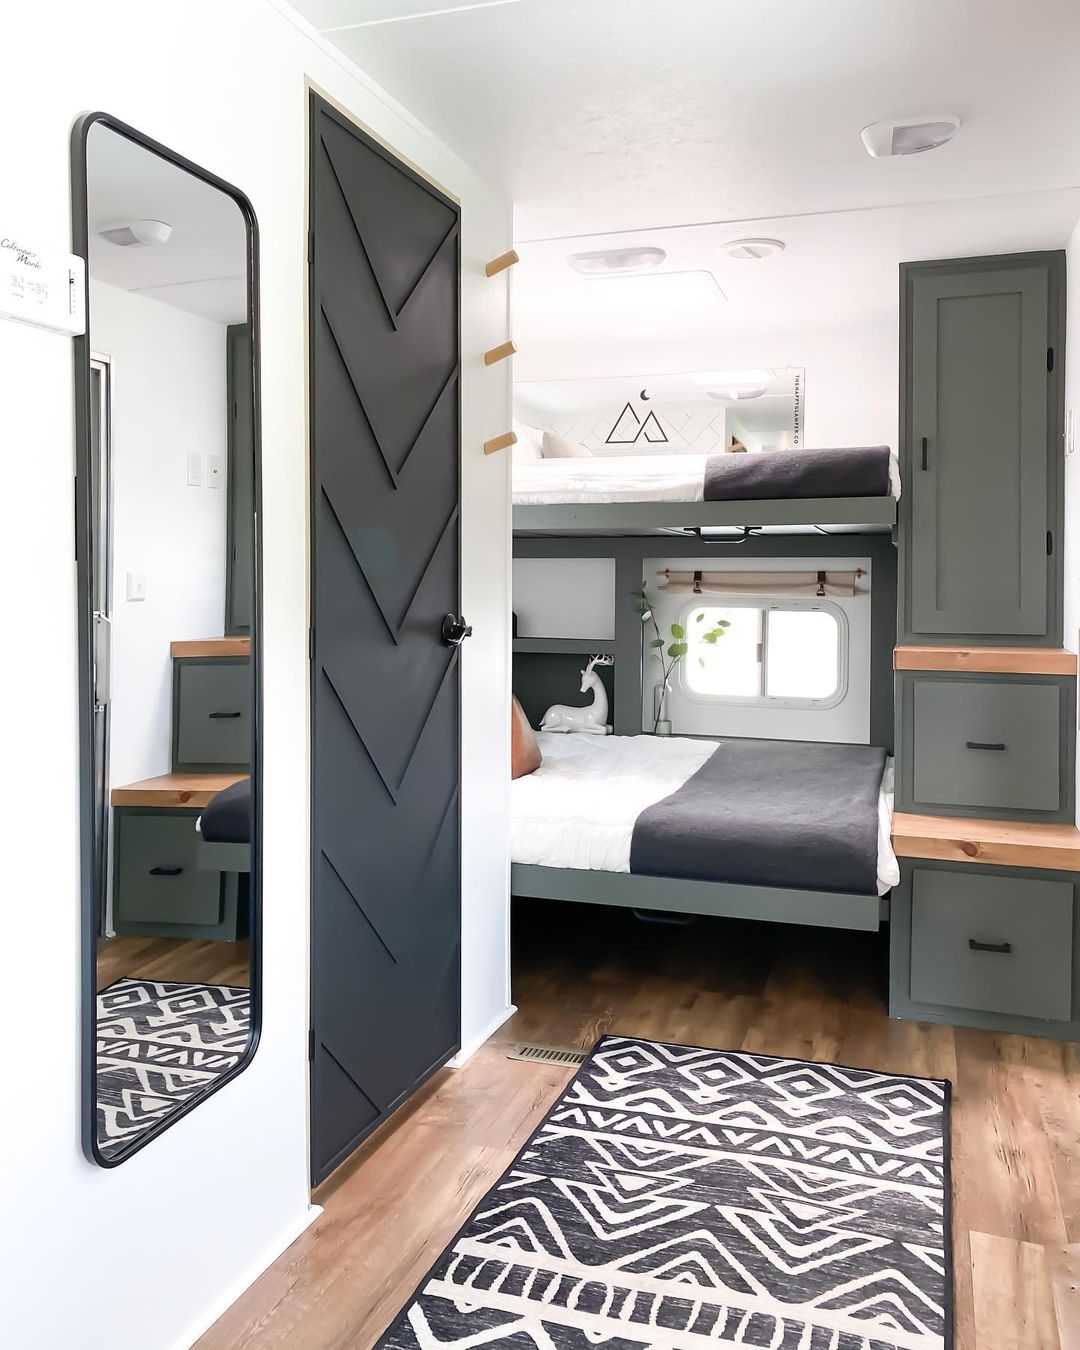 RV bedroom featuring several storage cabinets. Photo by Instagram user @thehappyglamperco.